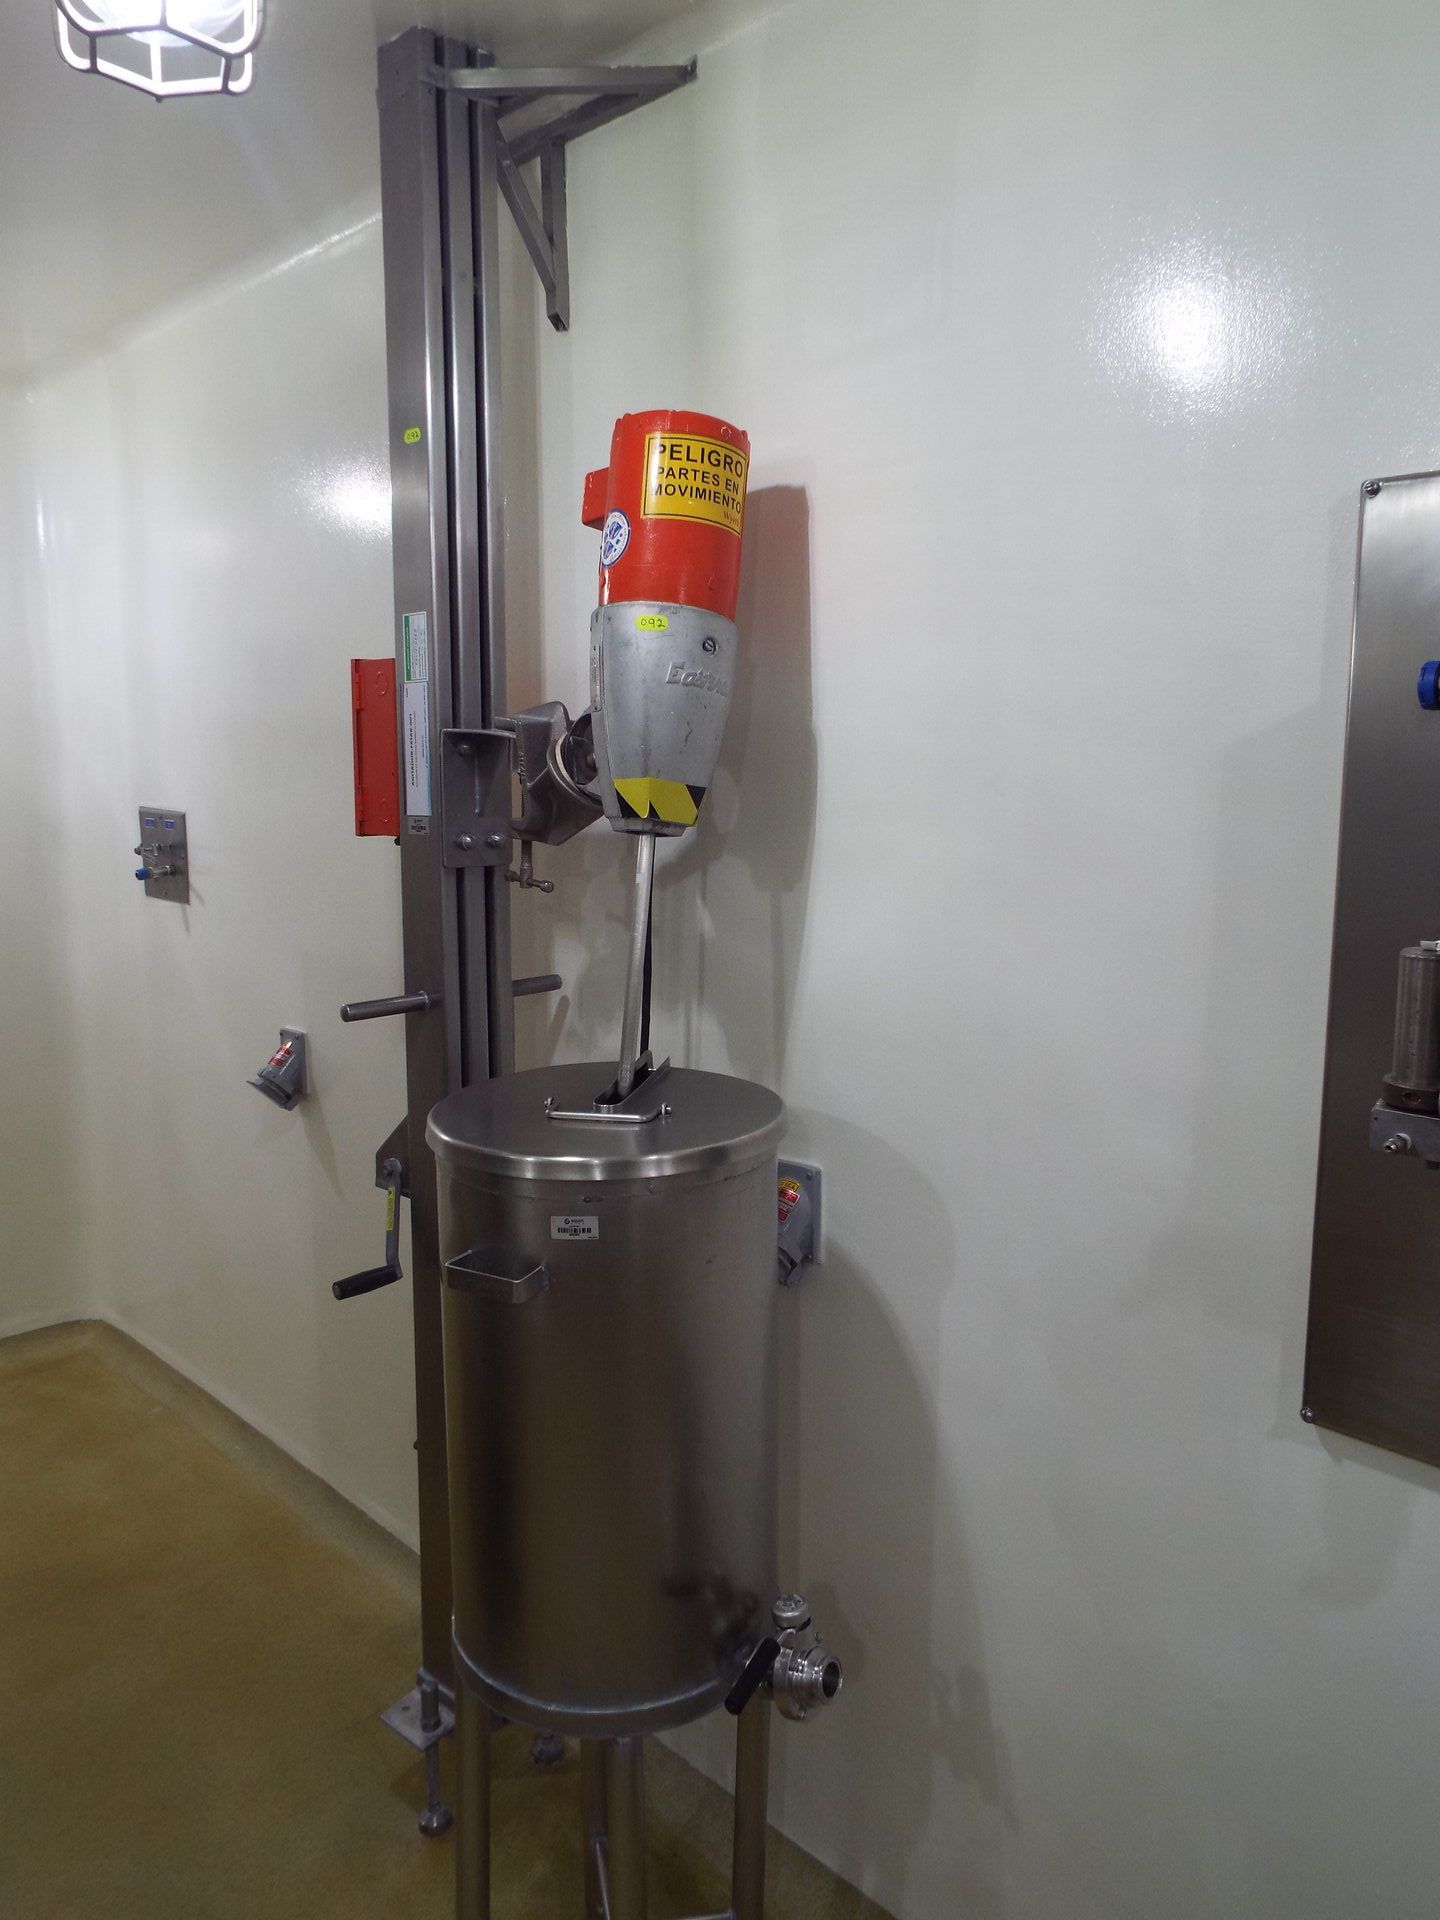 60 liter stainless steel tank with Eastern agitator mounted over stainless steel mechanical elevator